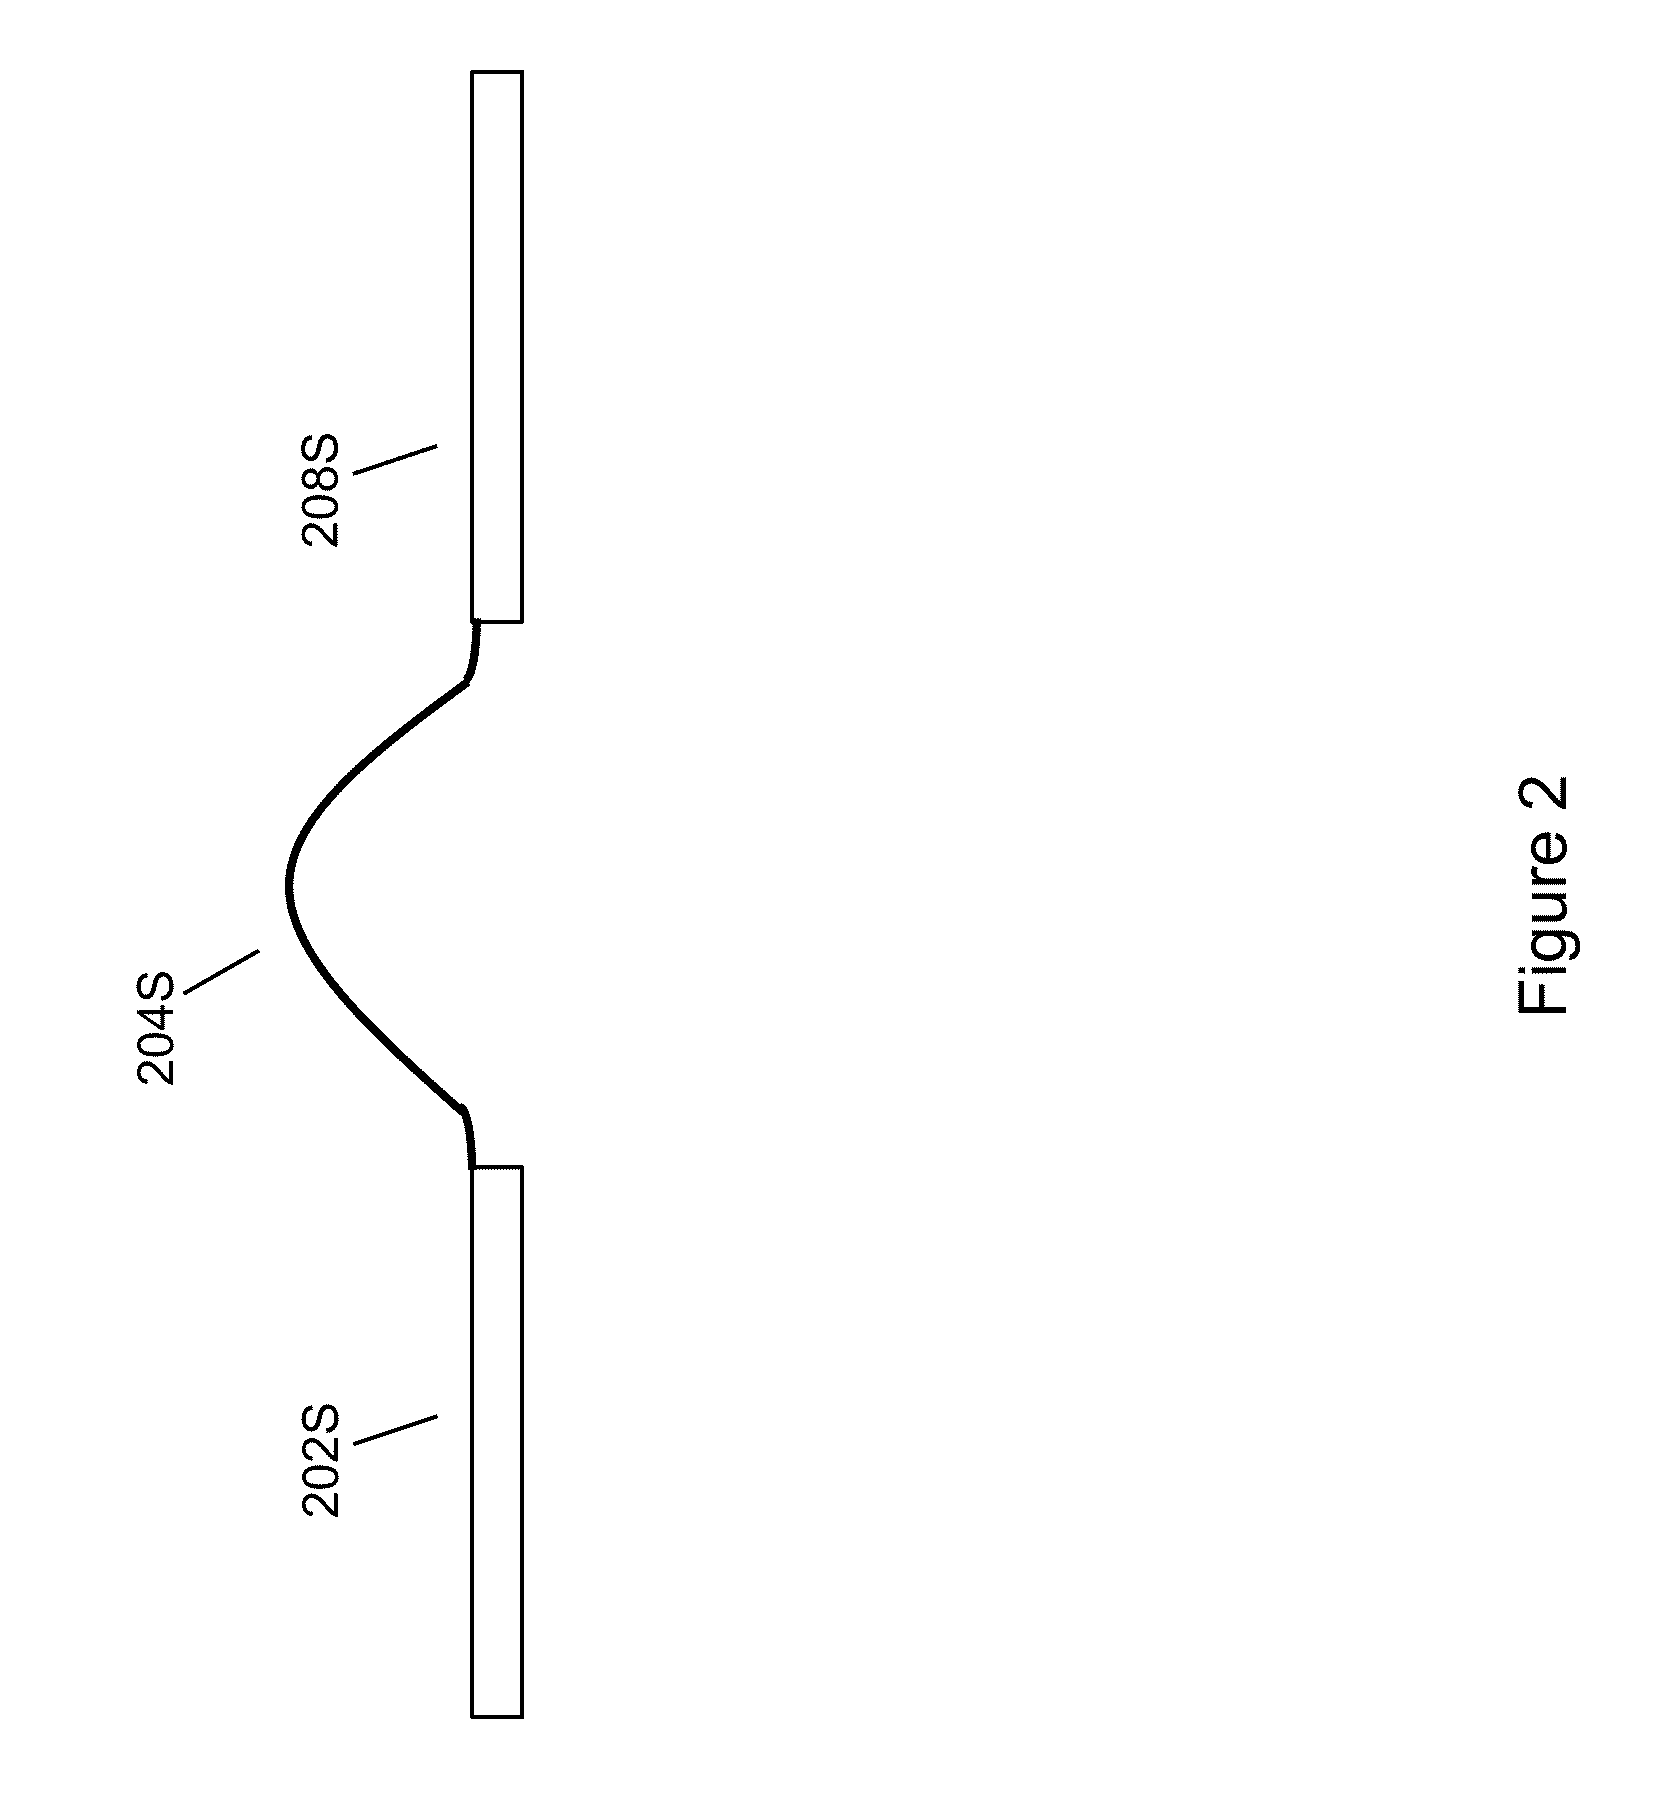 Systems, methods, and devices using stretchable or flexible electronics for medical applications